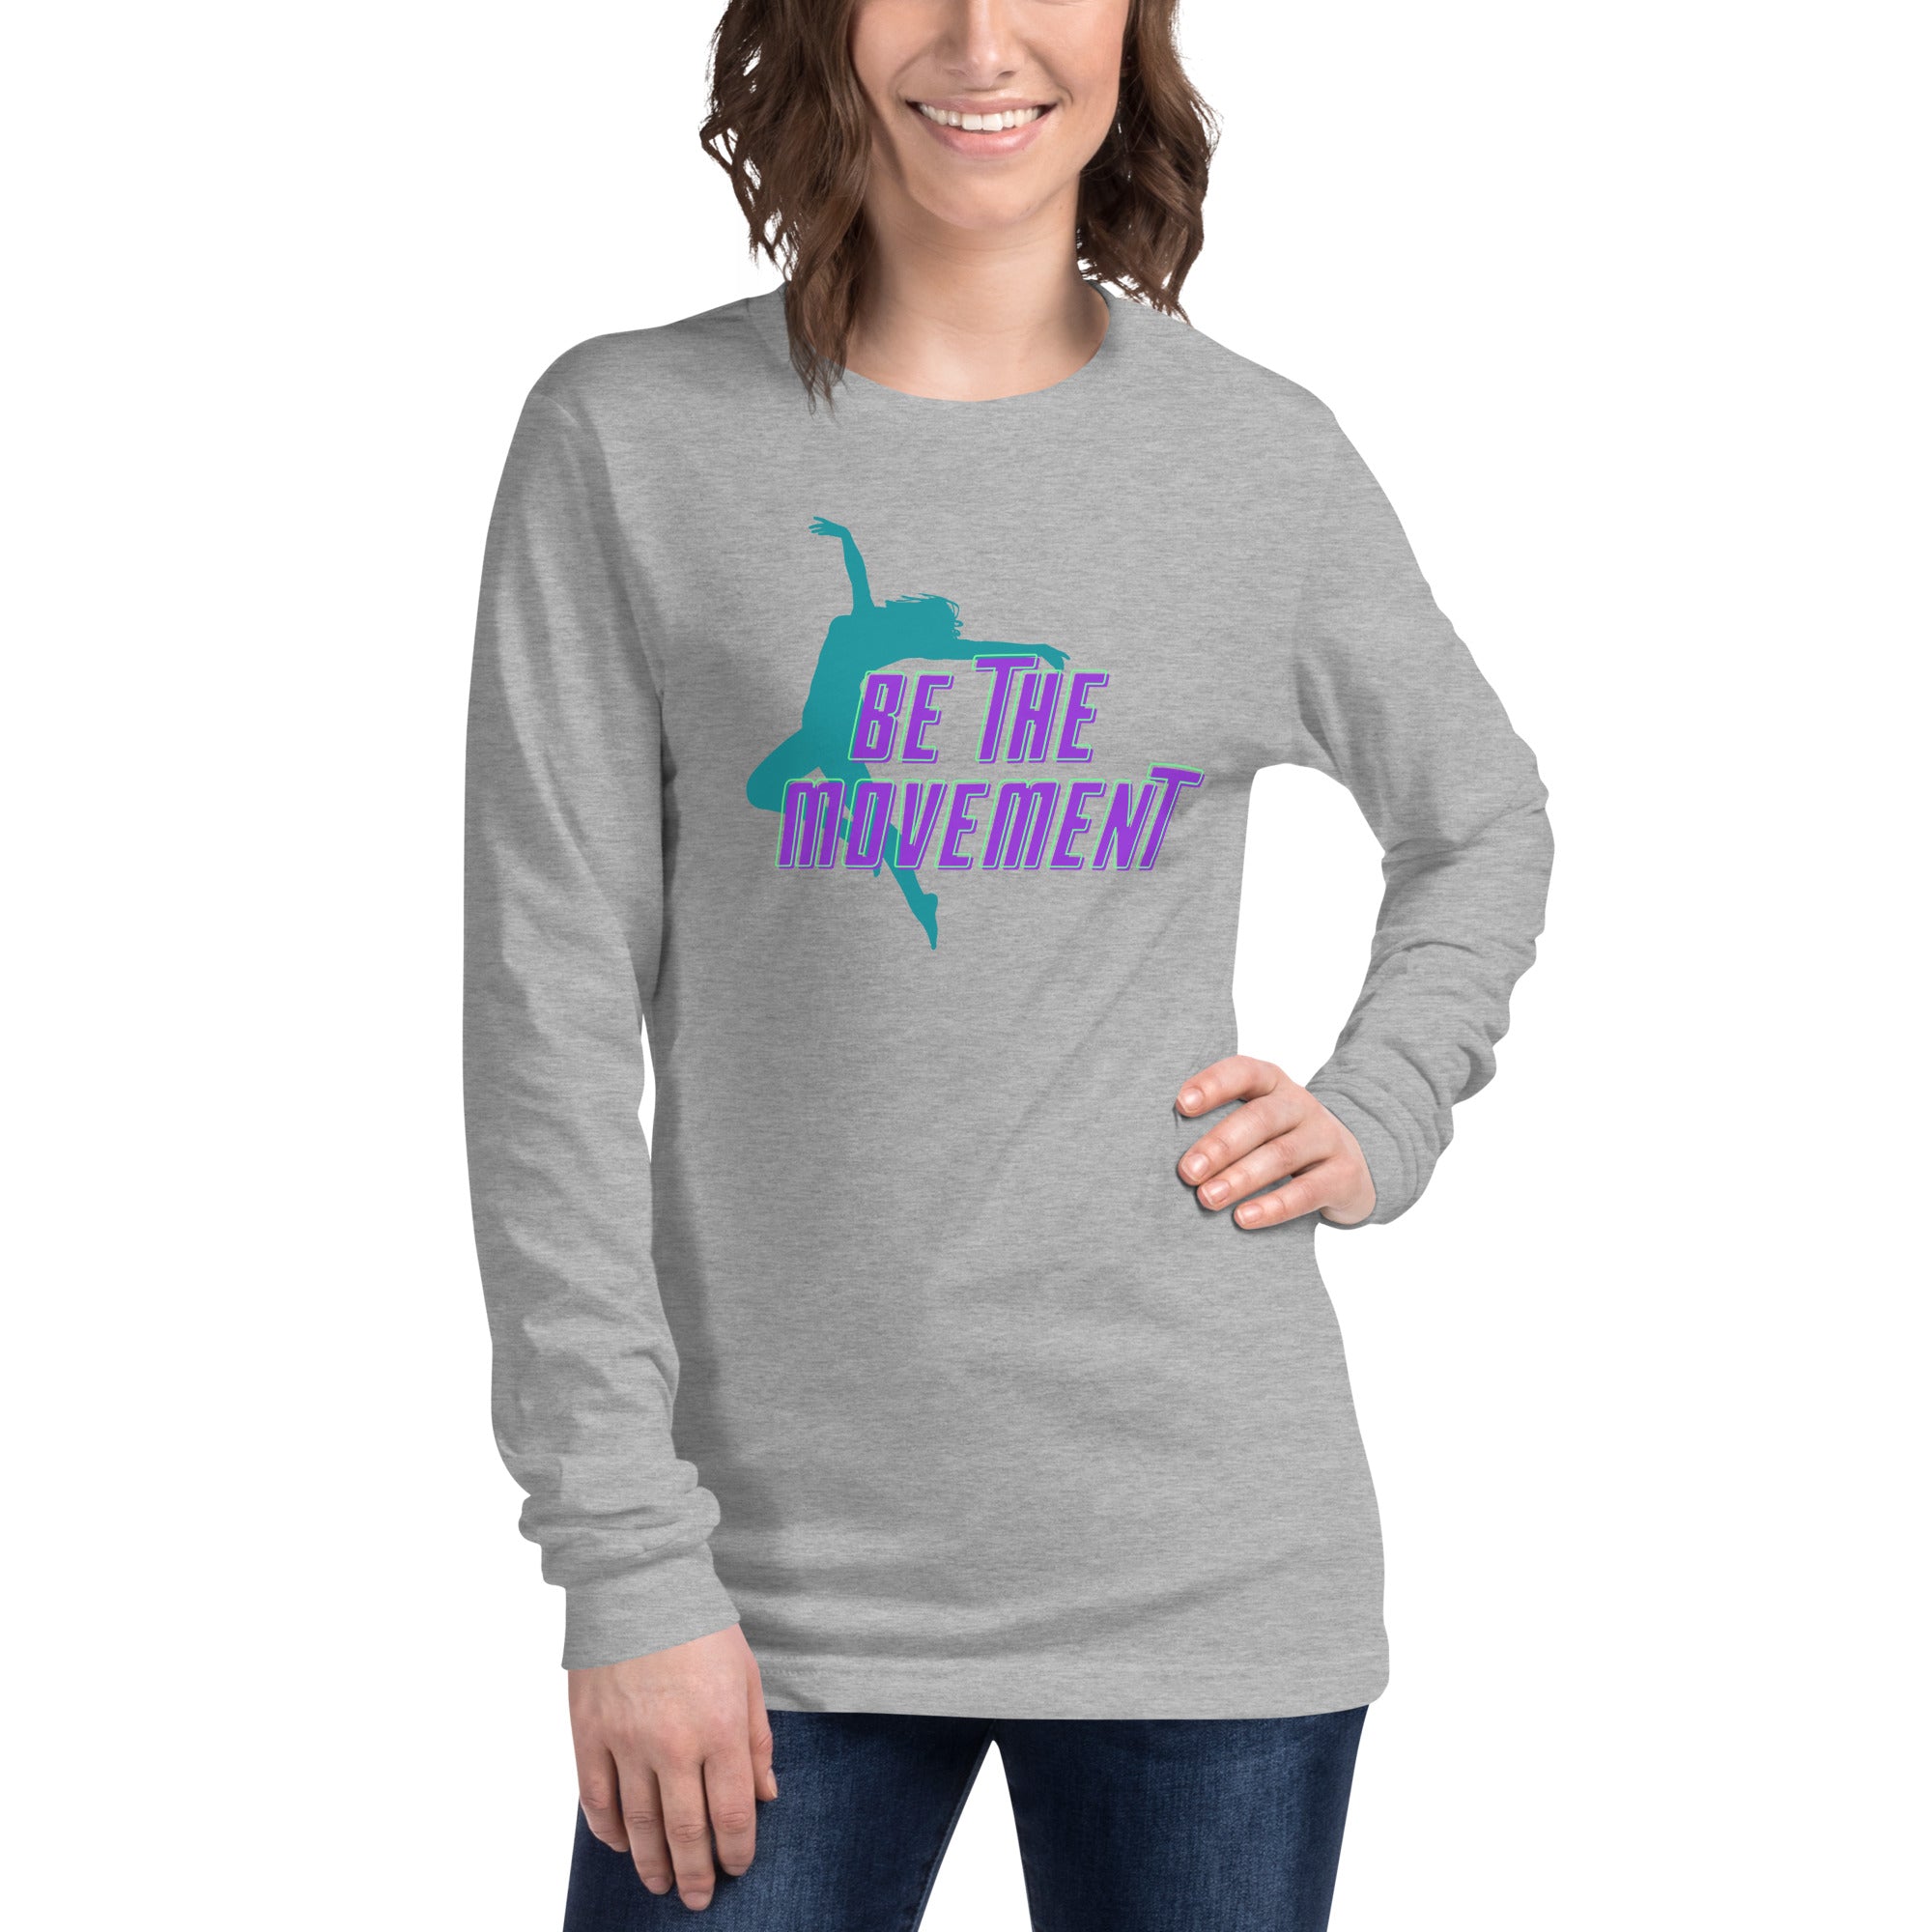 Be The Movement Women's Select Long Sleeve